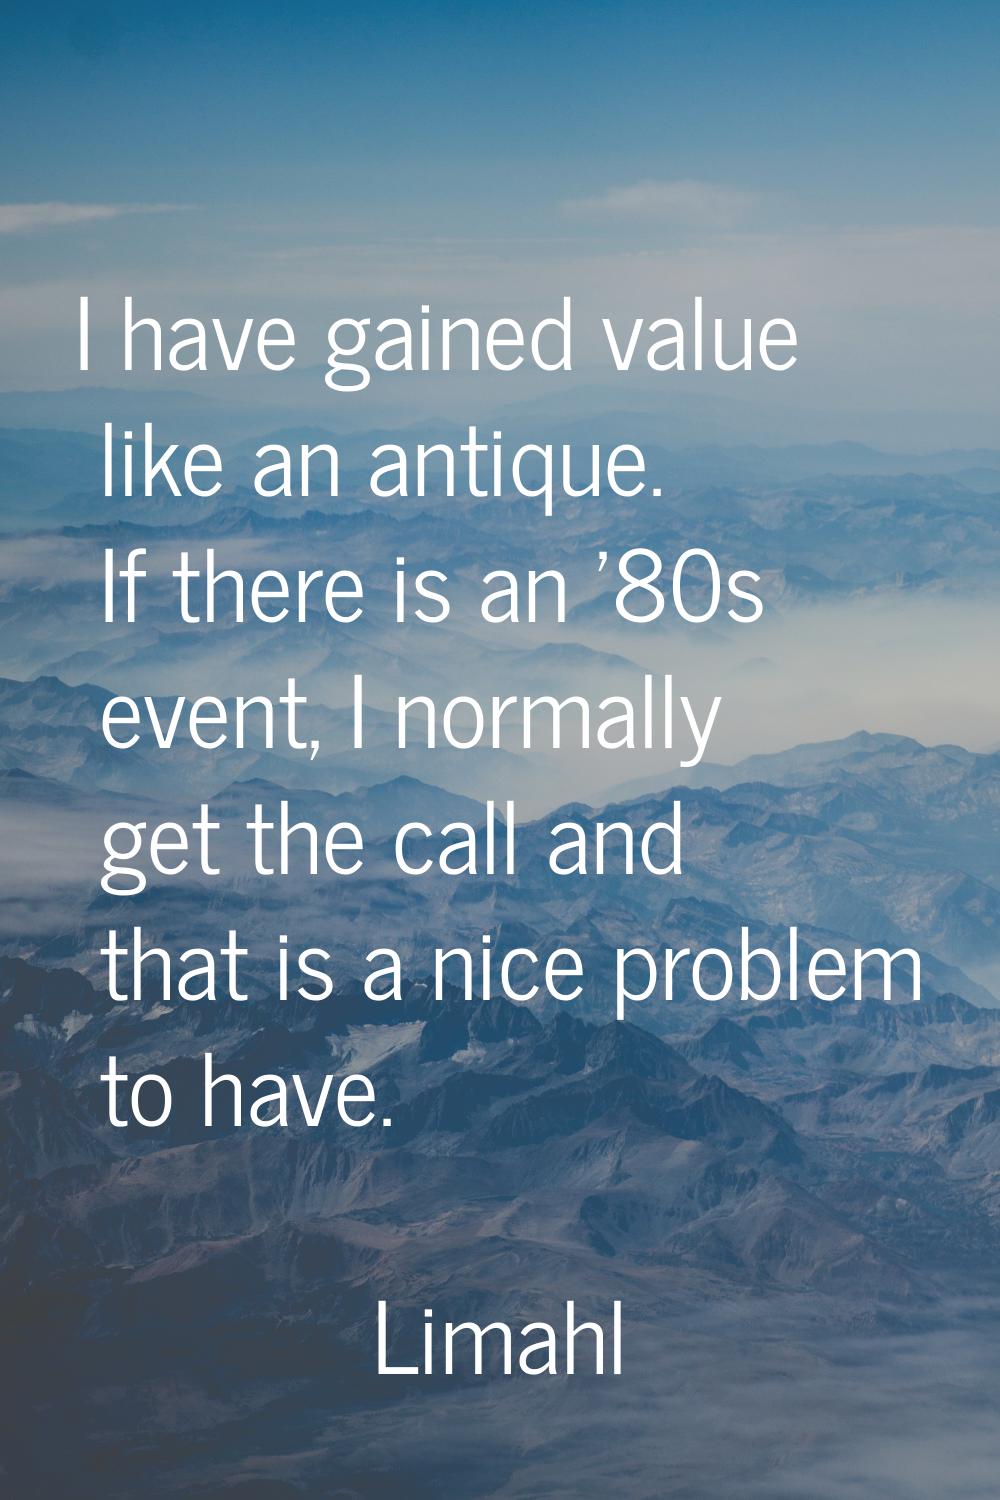 I have gained value like an antique. If there is an '80s event, I normally get the call and that is